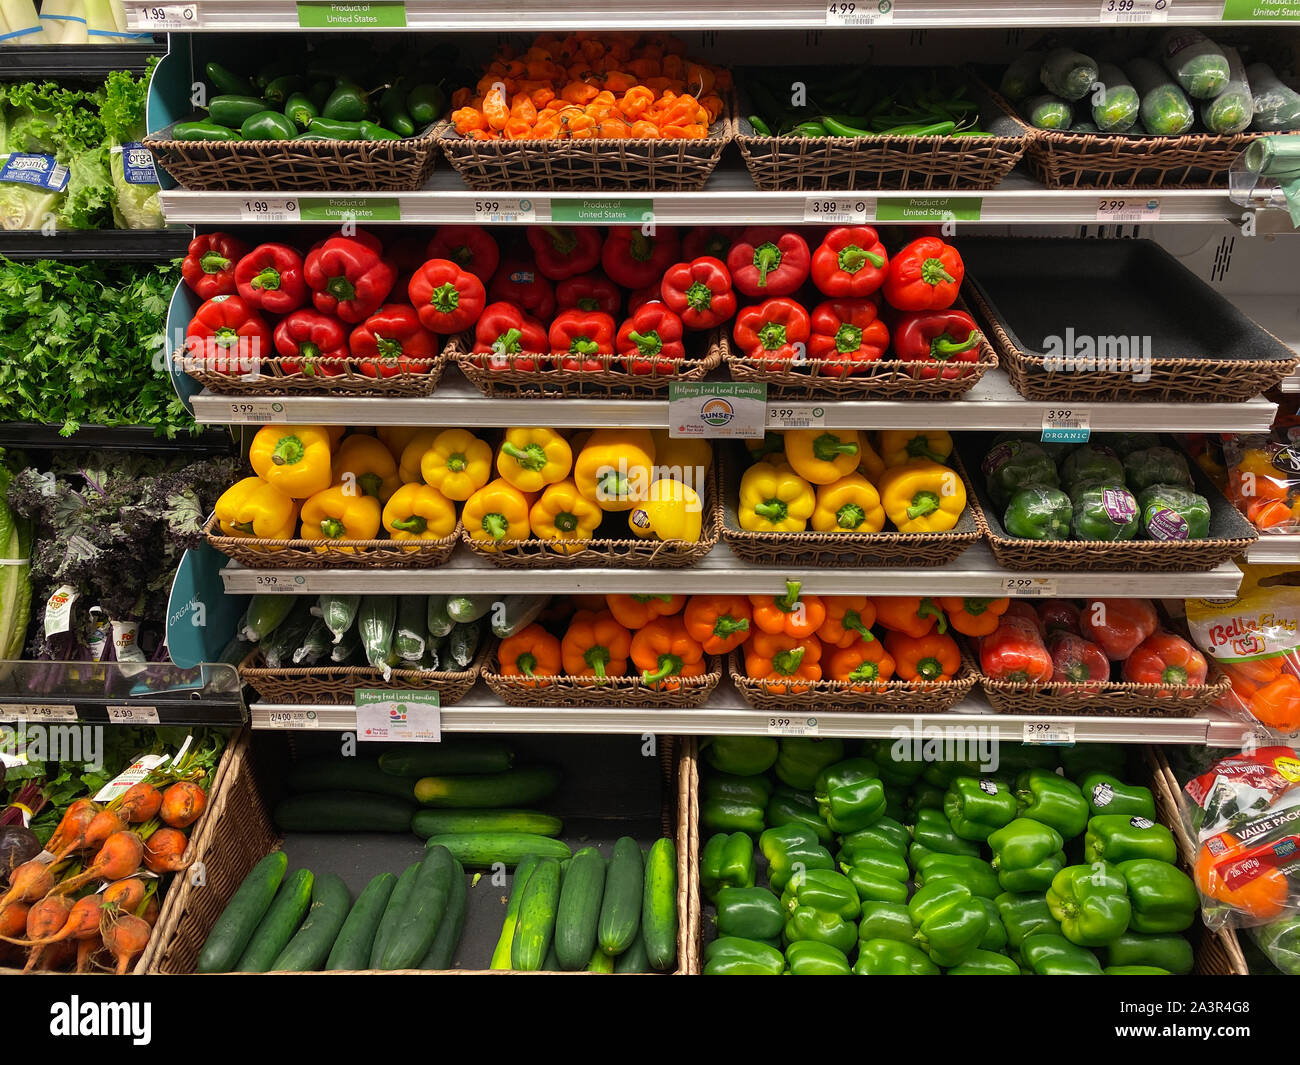 https://c8.alamy.com/comp/2A3R4G8/orlandoflusa-10819-the-fresh-produce-aisle-of-a-grocery-store-with-colorful-fresh-fruits-and-vegetables-ready-to-be-purchased-by-consumers-2A3R4G8.jpg